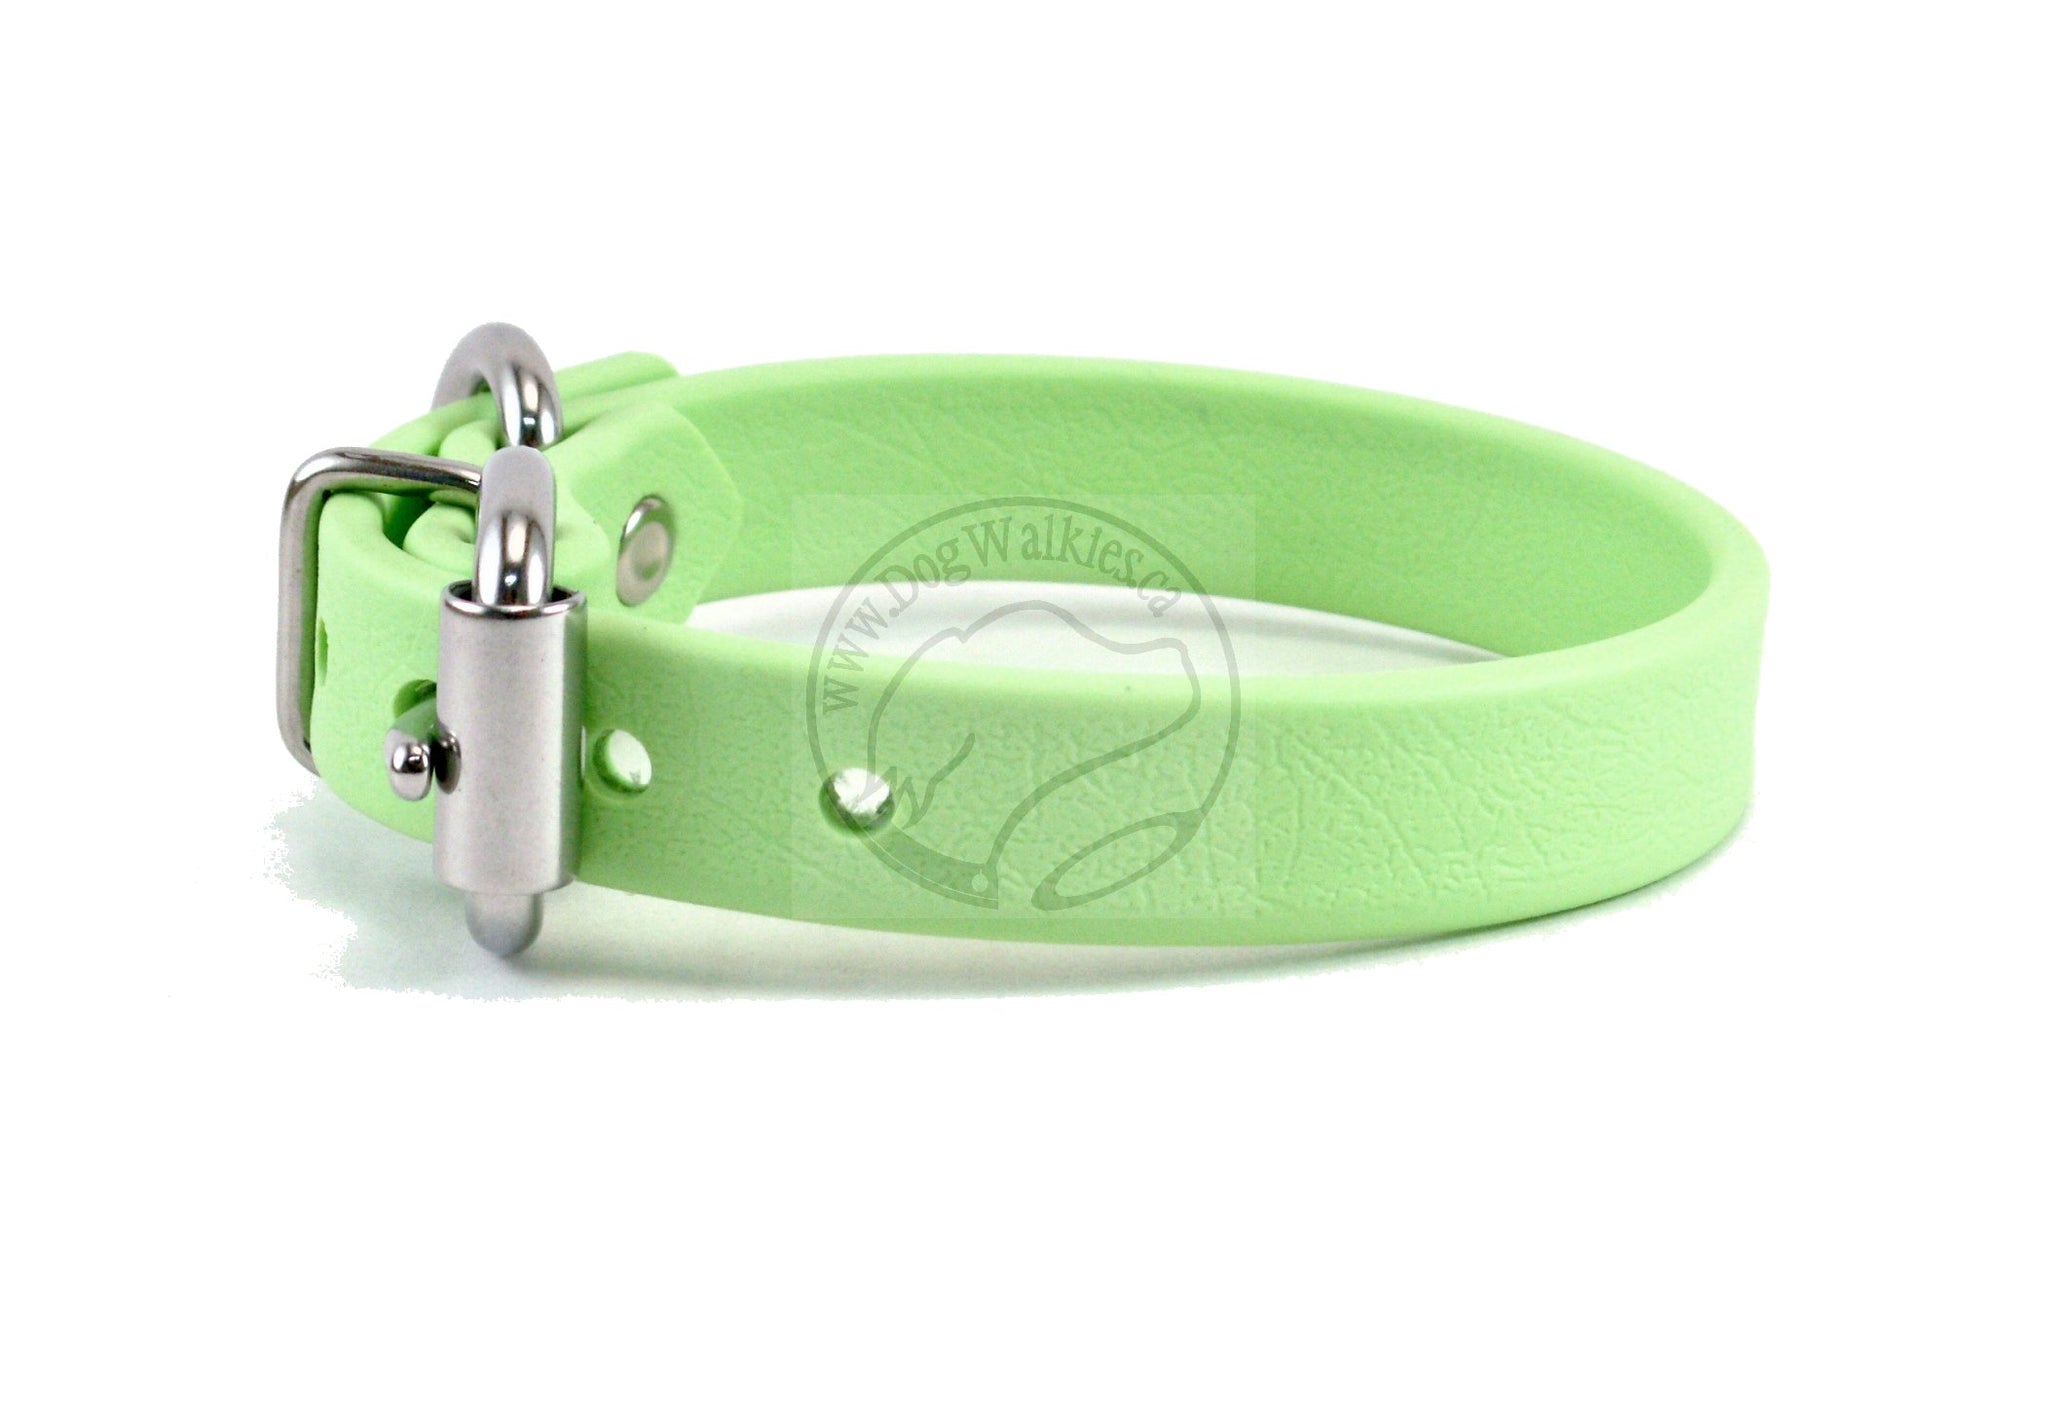 Discontinued- Limited Pastel Mint Green Biothane Dog Collar - 5/8"(16mm) wide